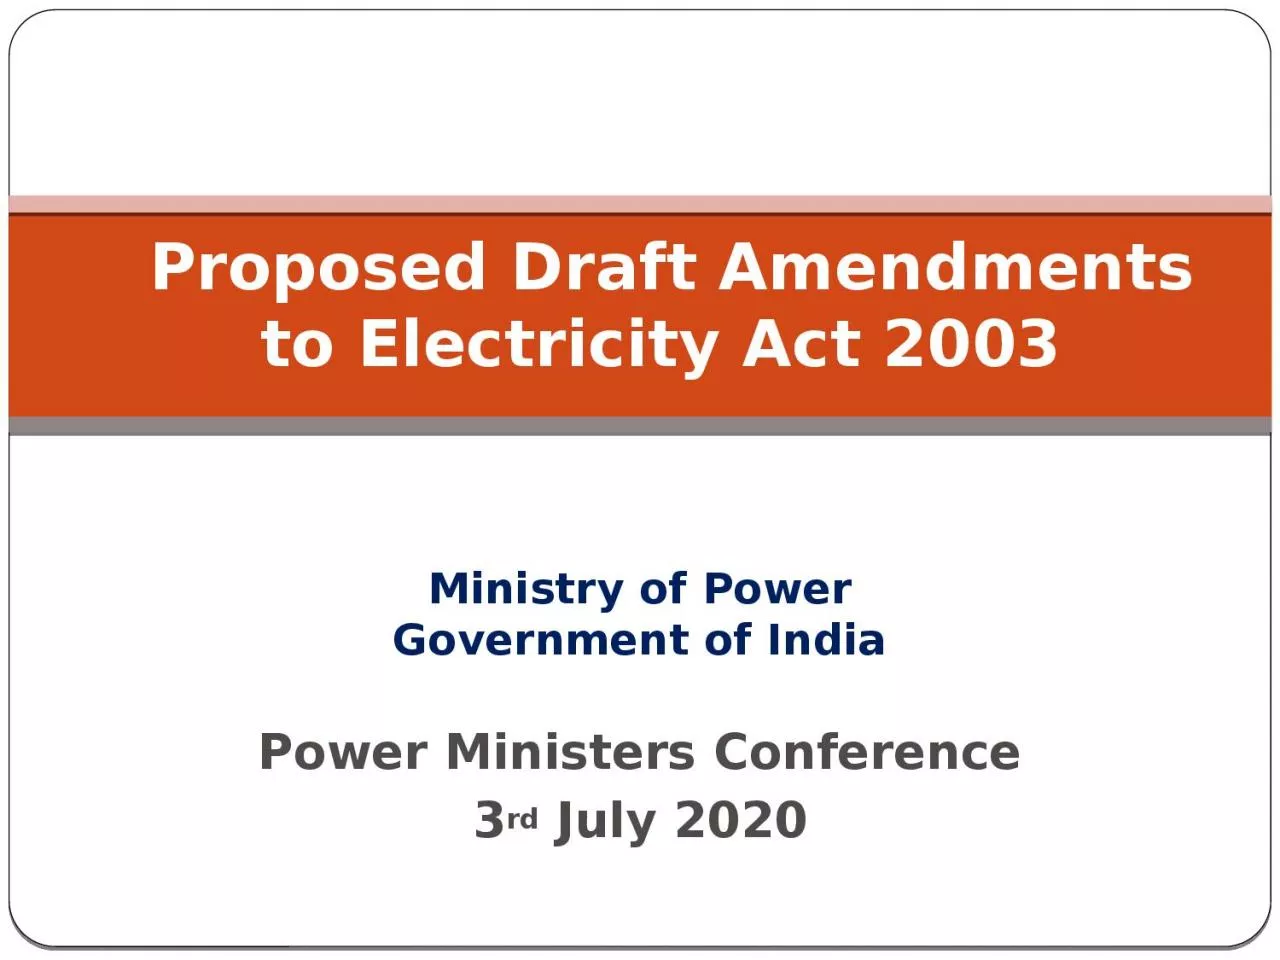 Power Ministers Conference